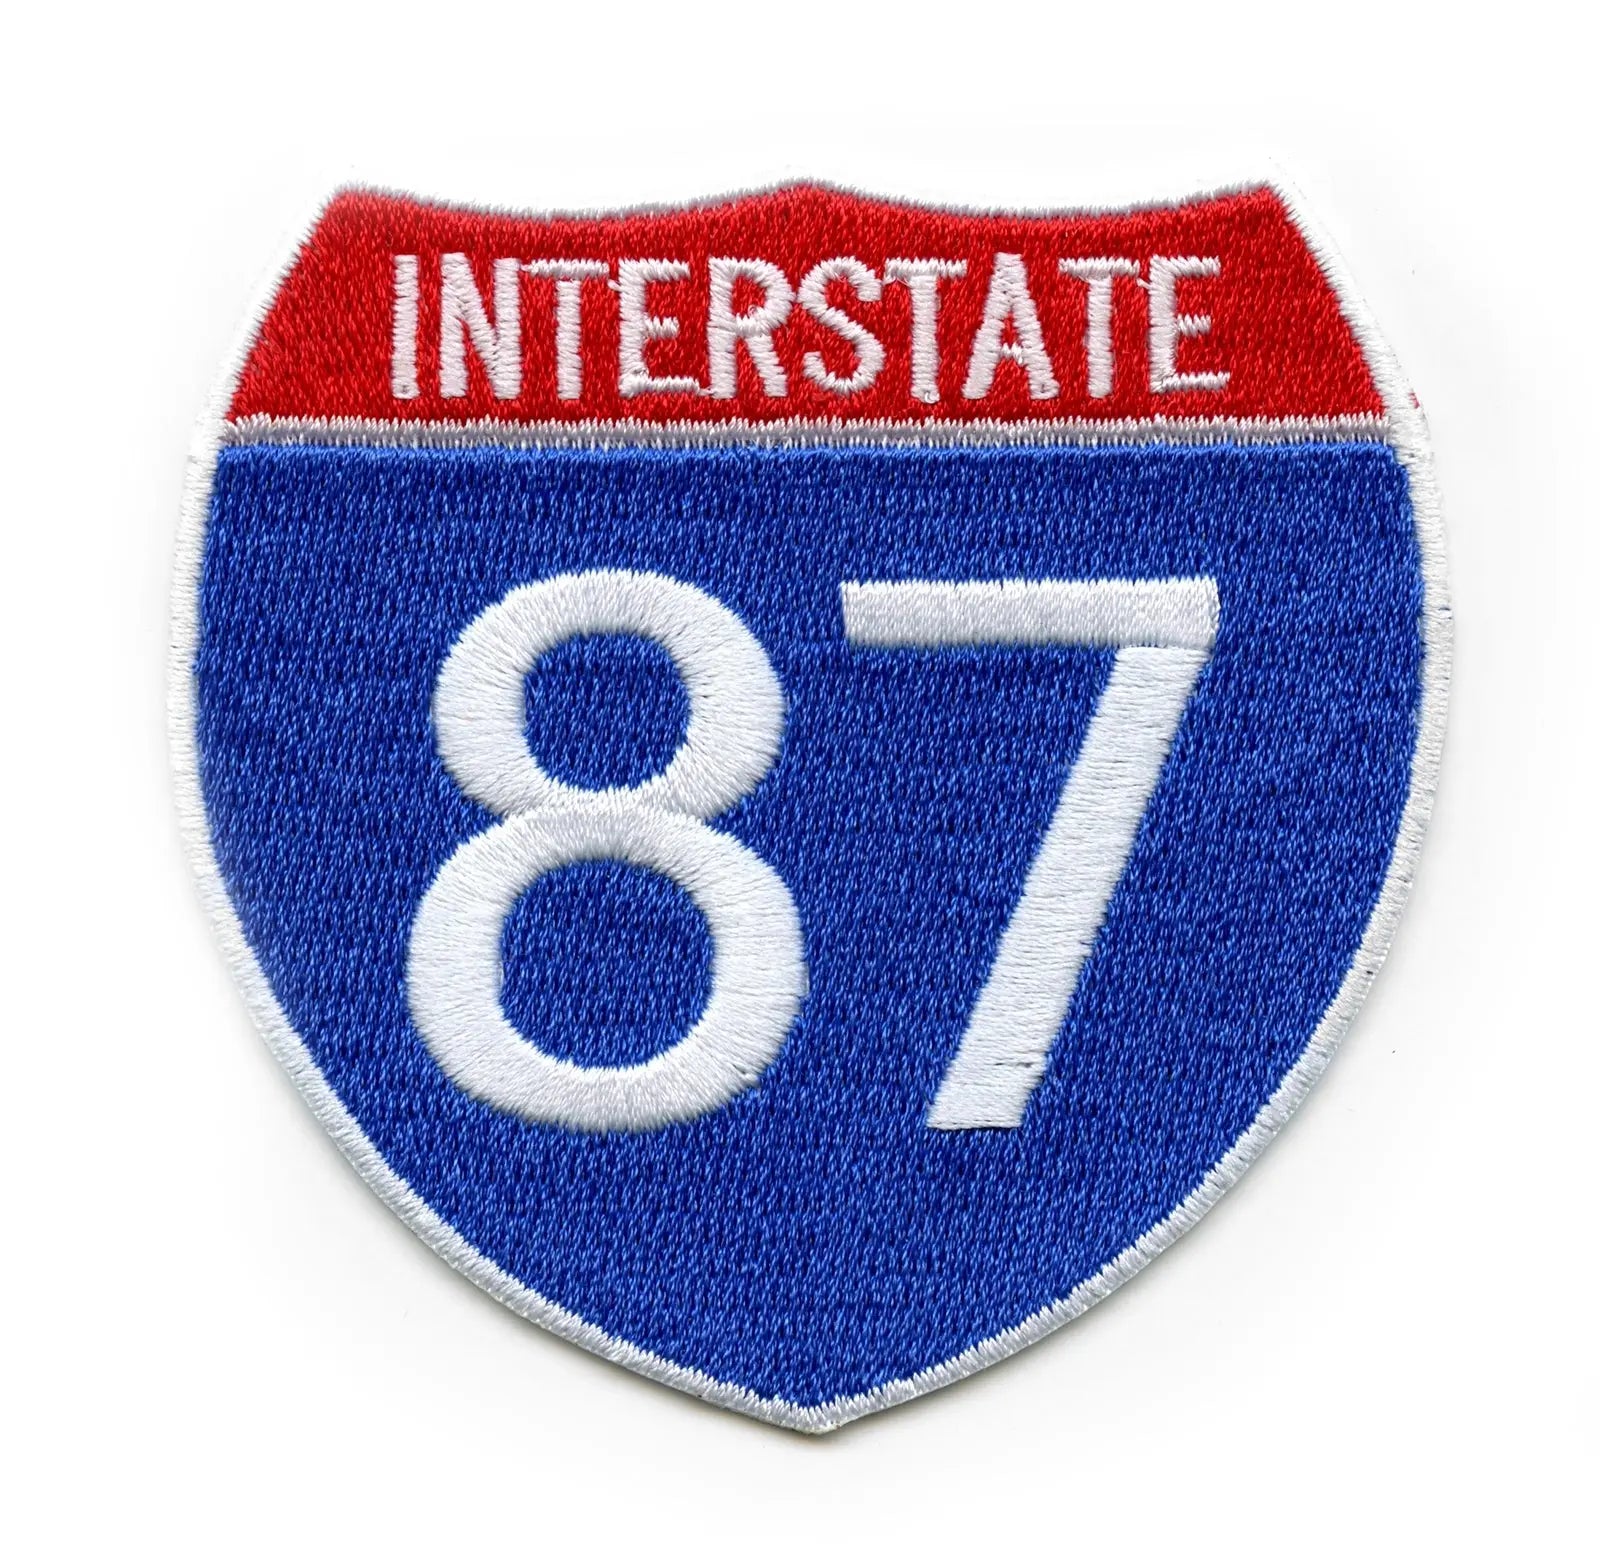 New York Freeway I-87 Sign Logo Embroidered Iron-on Patch 